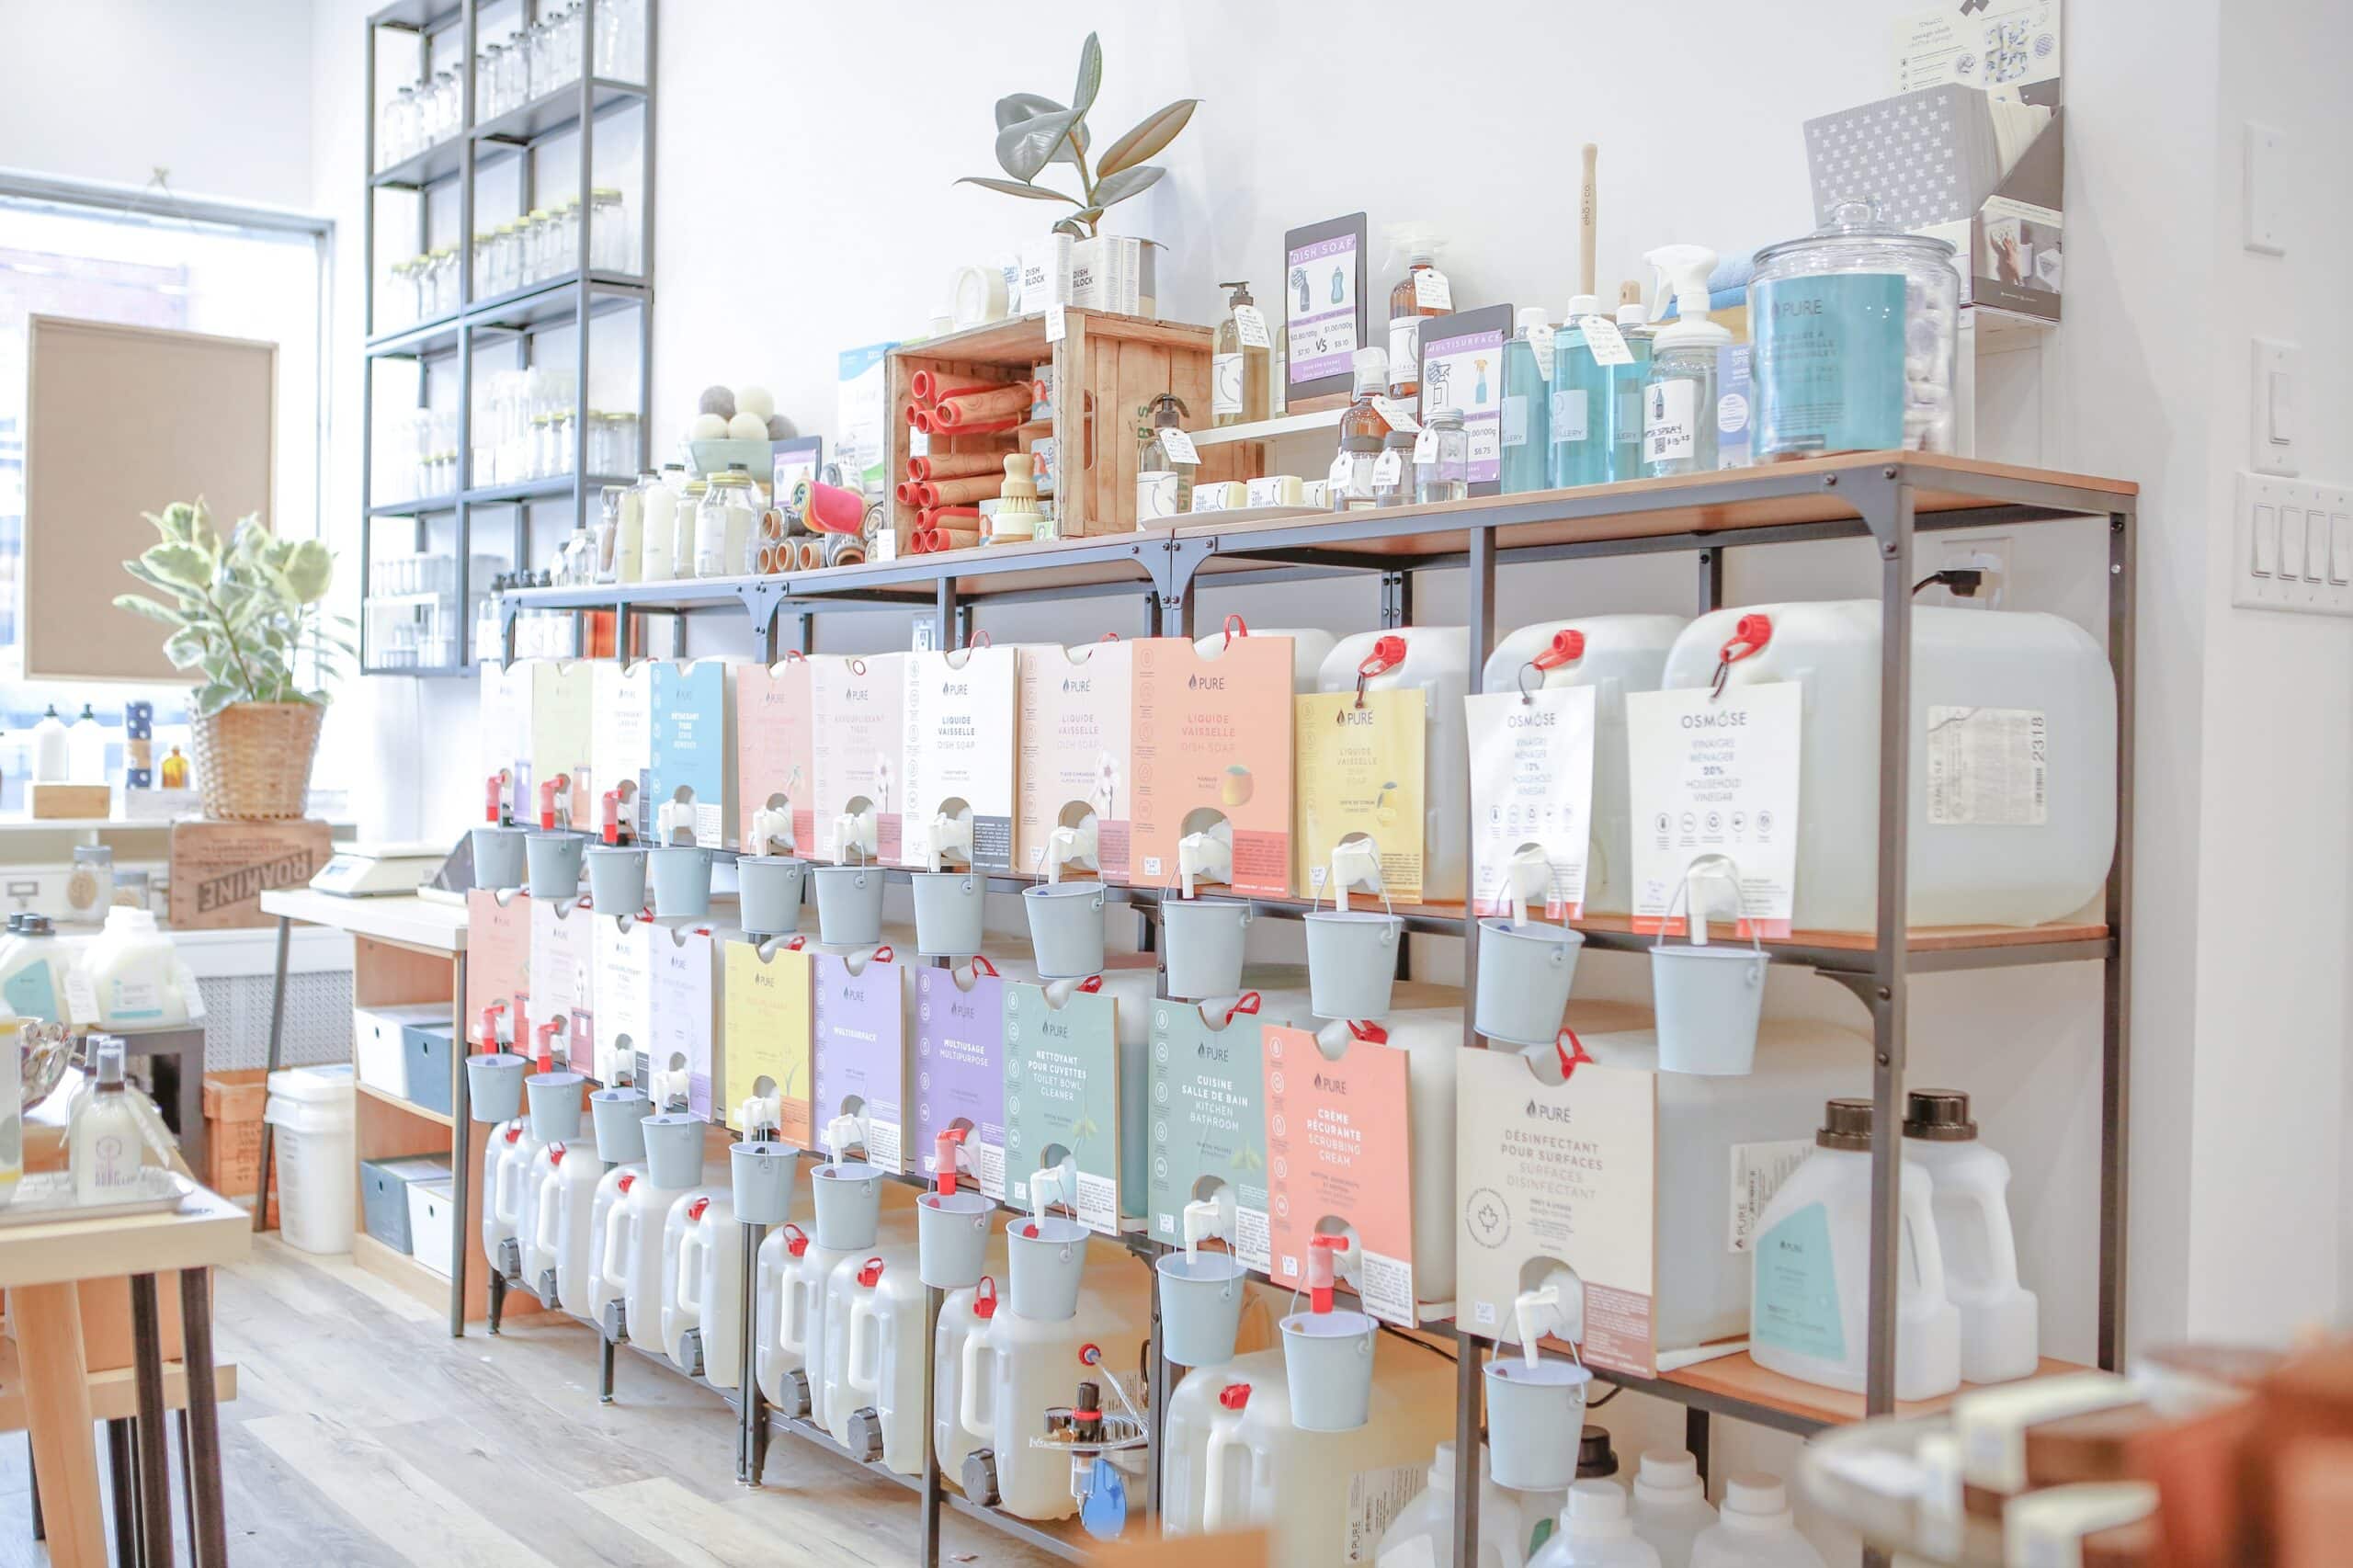 Display of lines of large jugs in The Keep Refillery, a Toronto store that sells personal care and home products in refillable containers to reduce their carbon footprint and packaging waste.